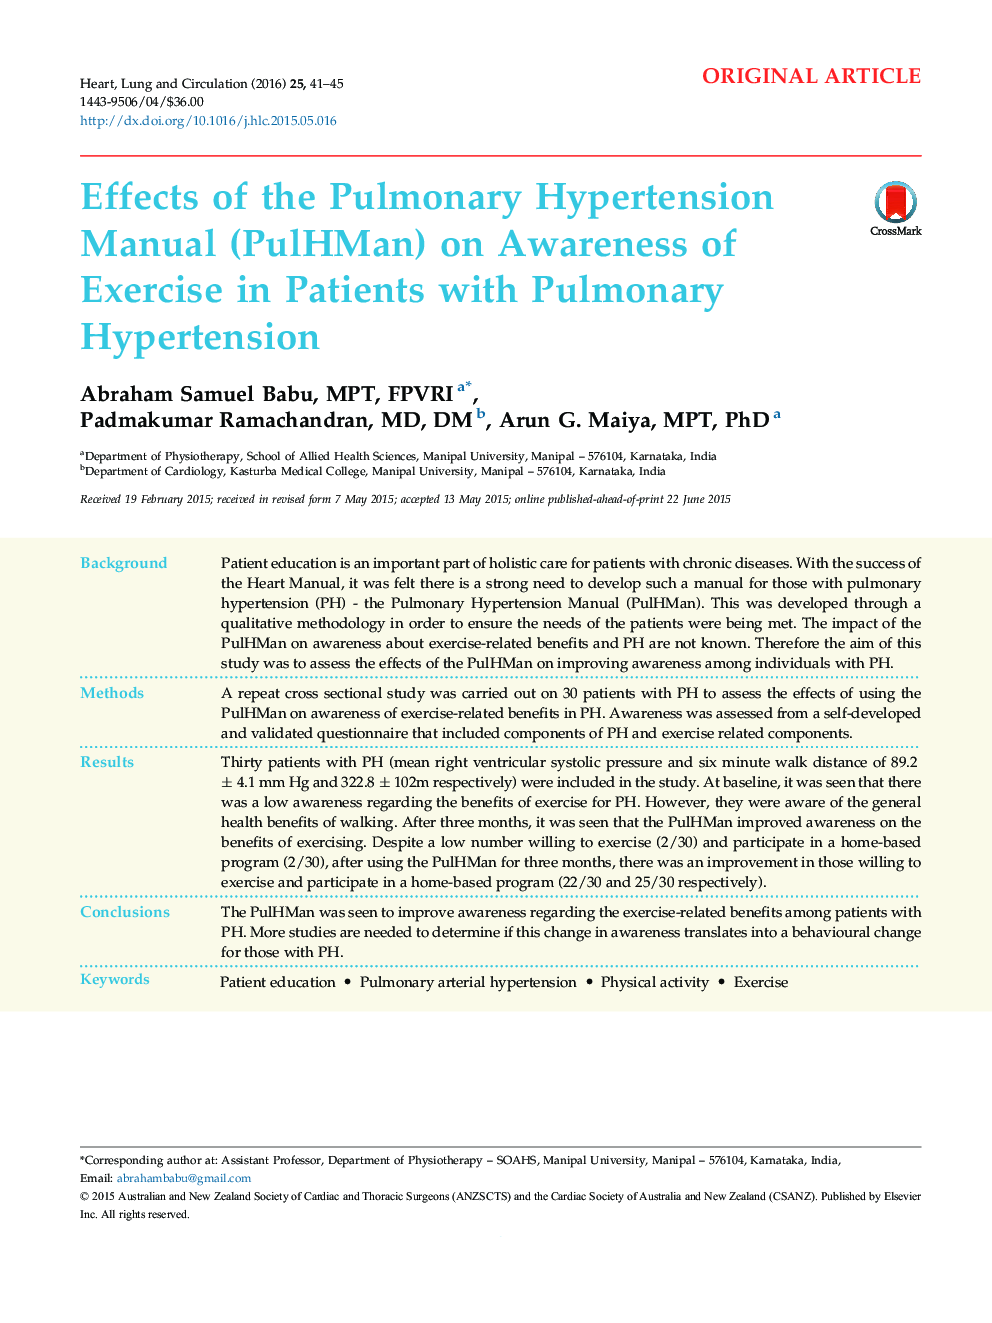 Effects of the Pulmonary Hypertension Manual (PulHMan) on Awareness of Exercise in Patients with Pulmonary Hypertension